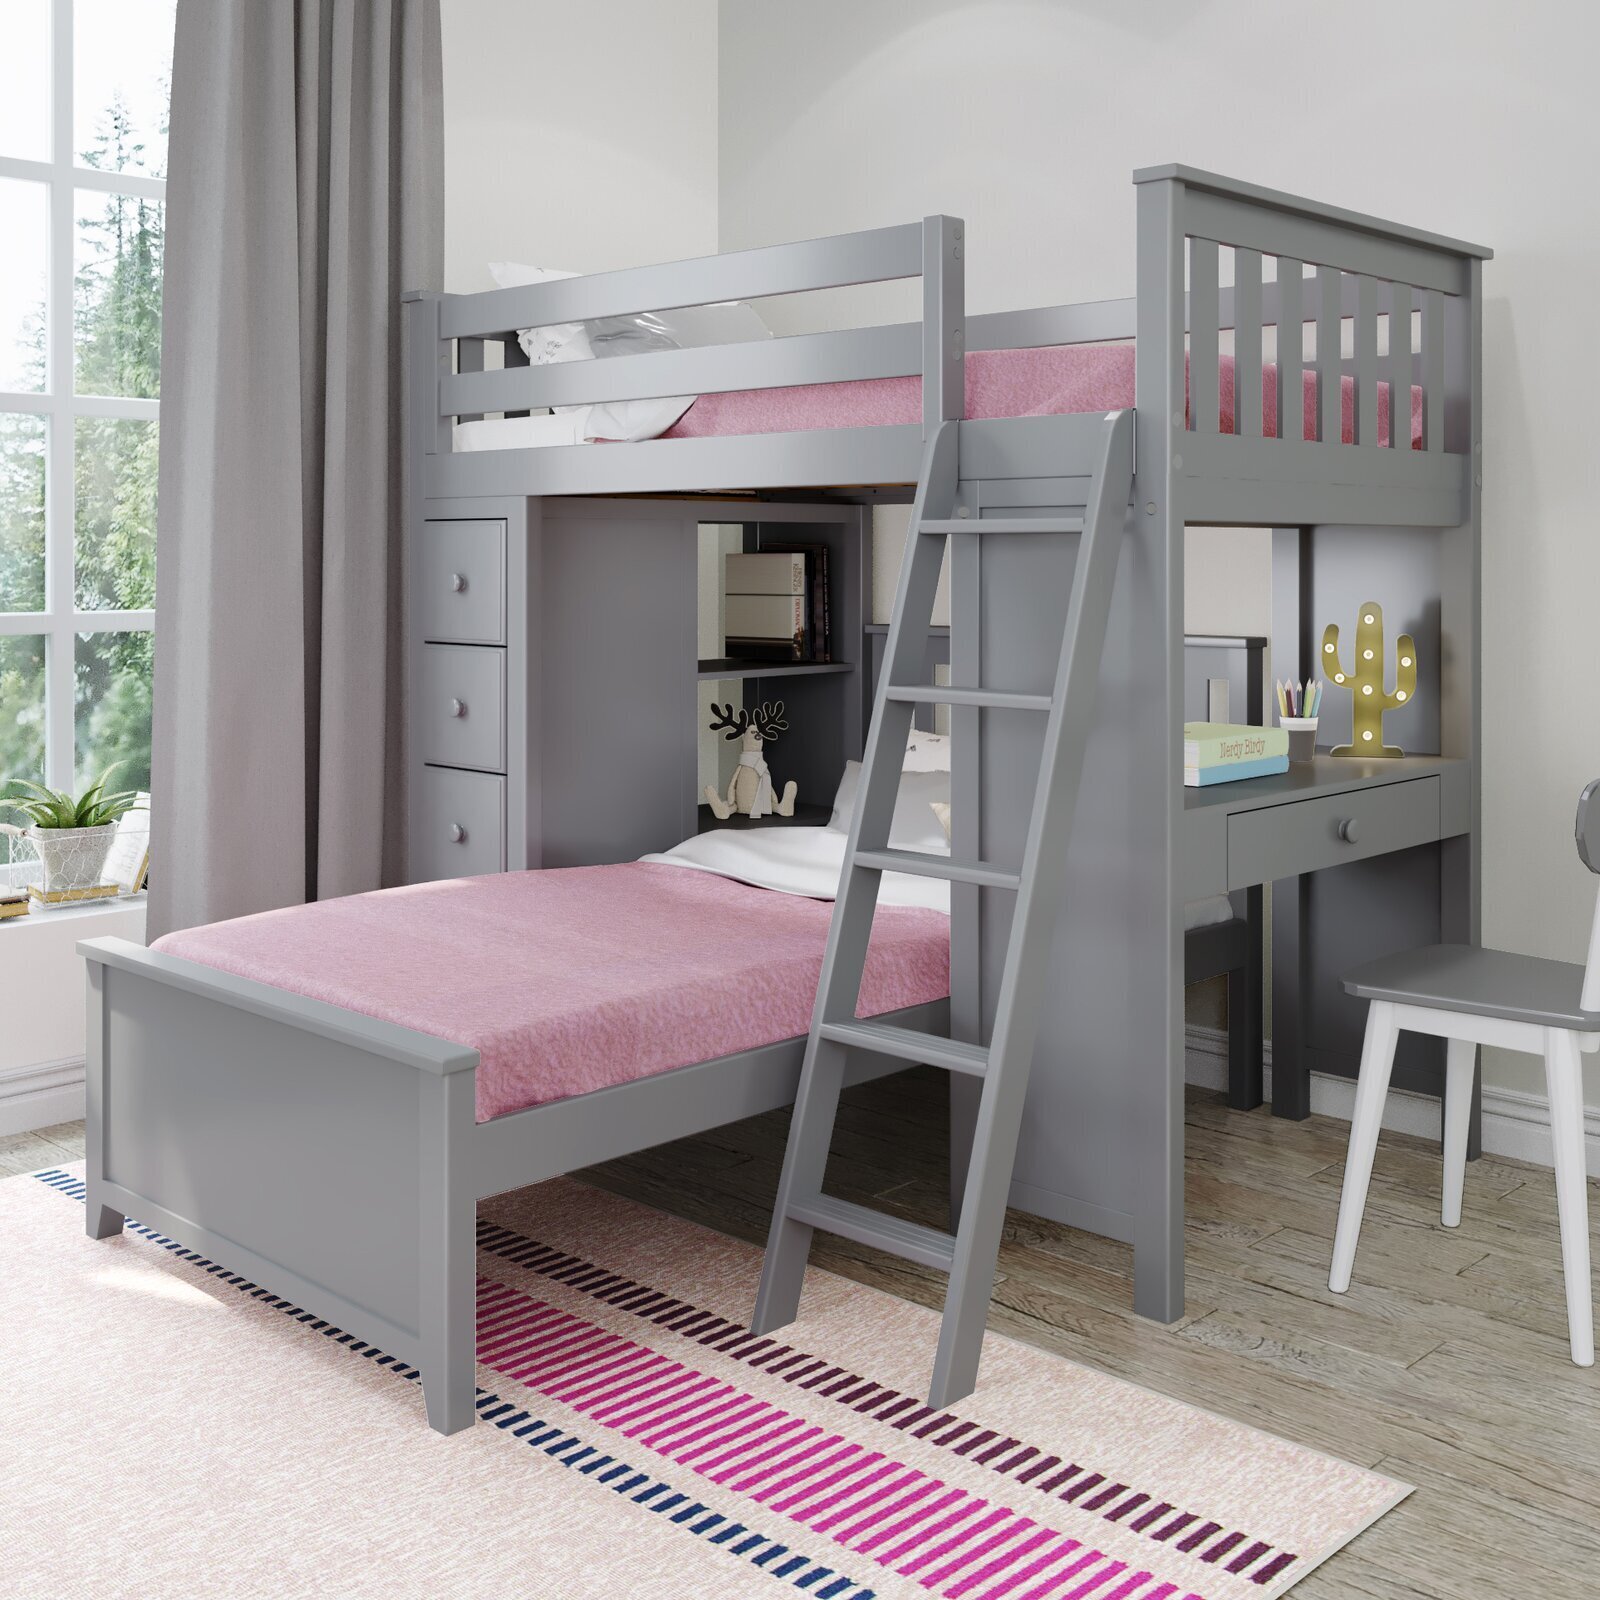 Traditional Bunk Bed With Desk